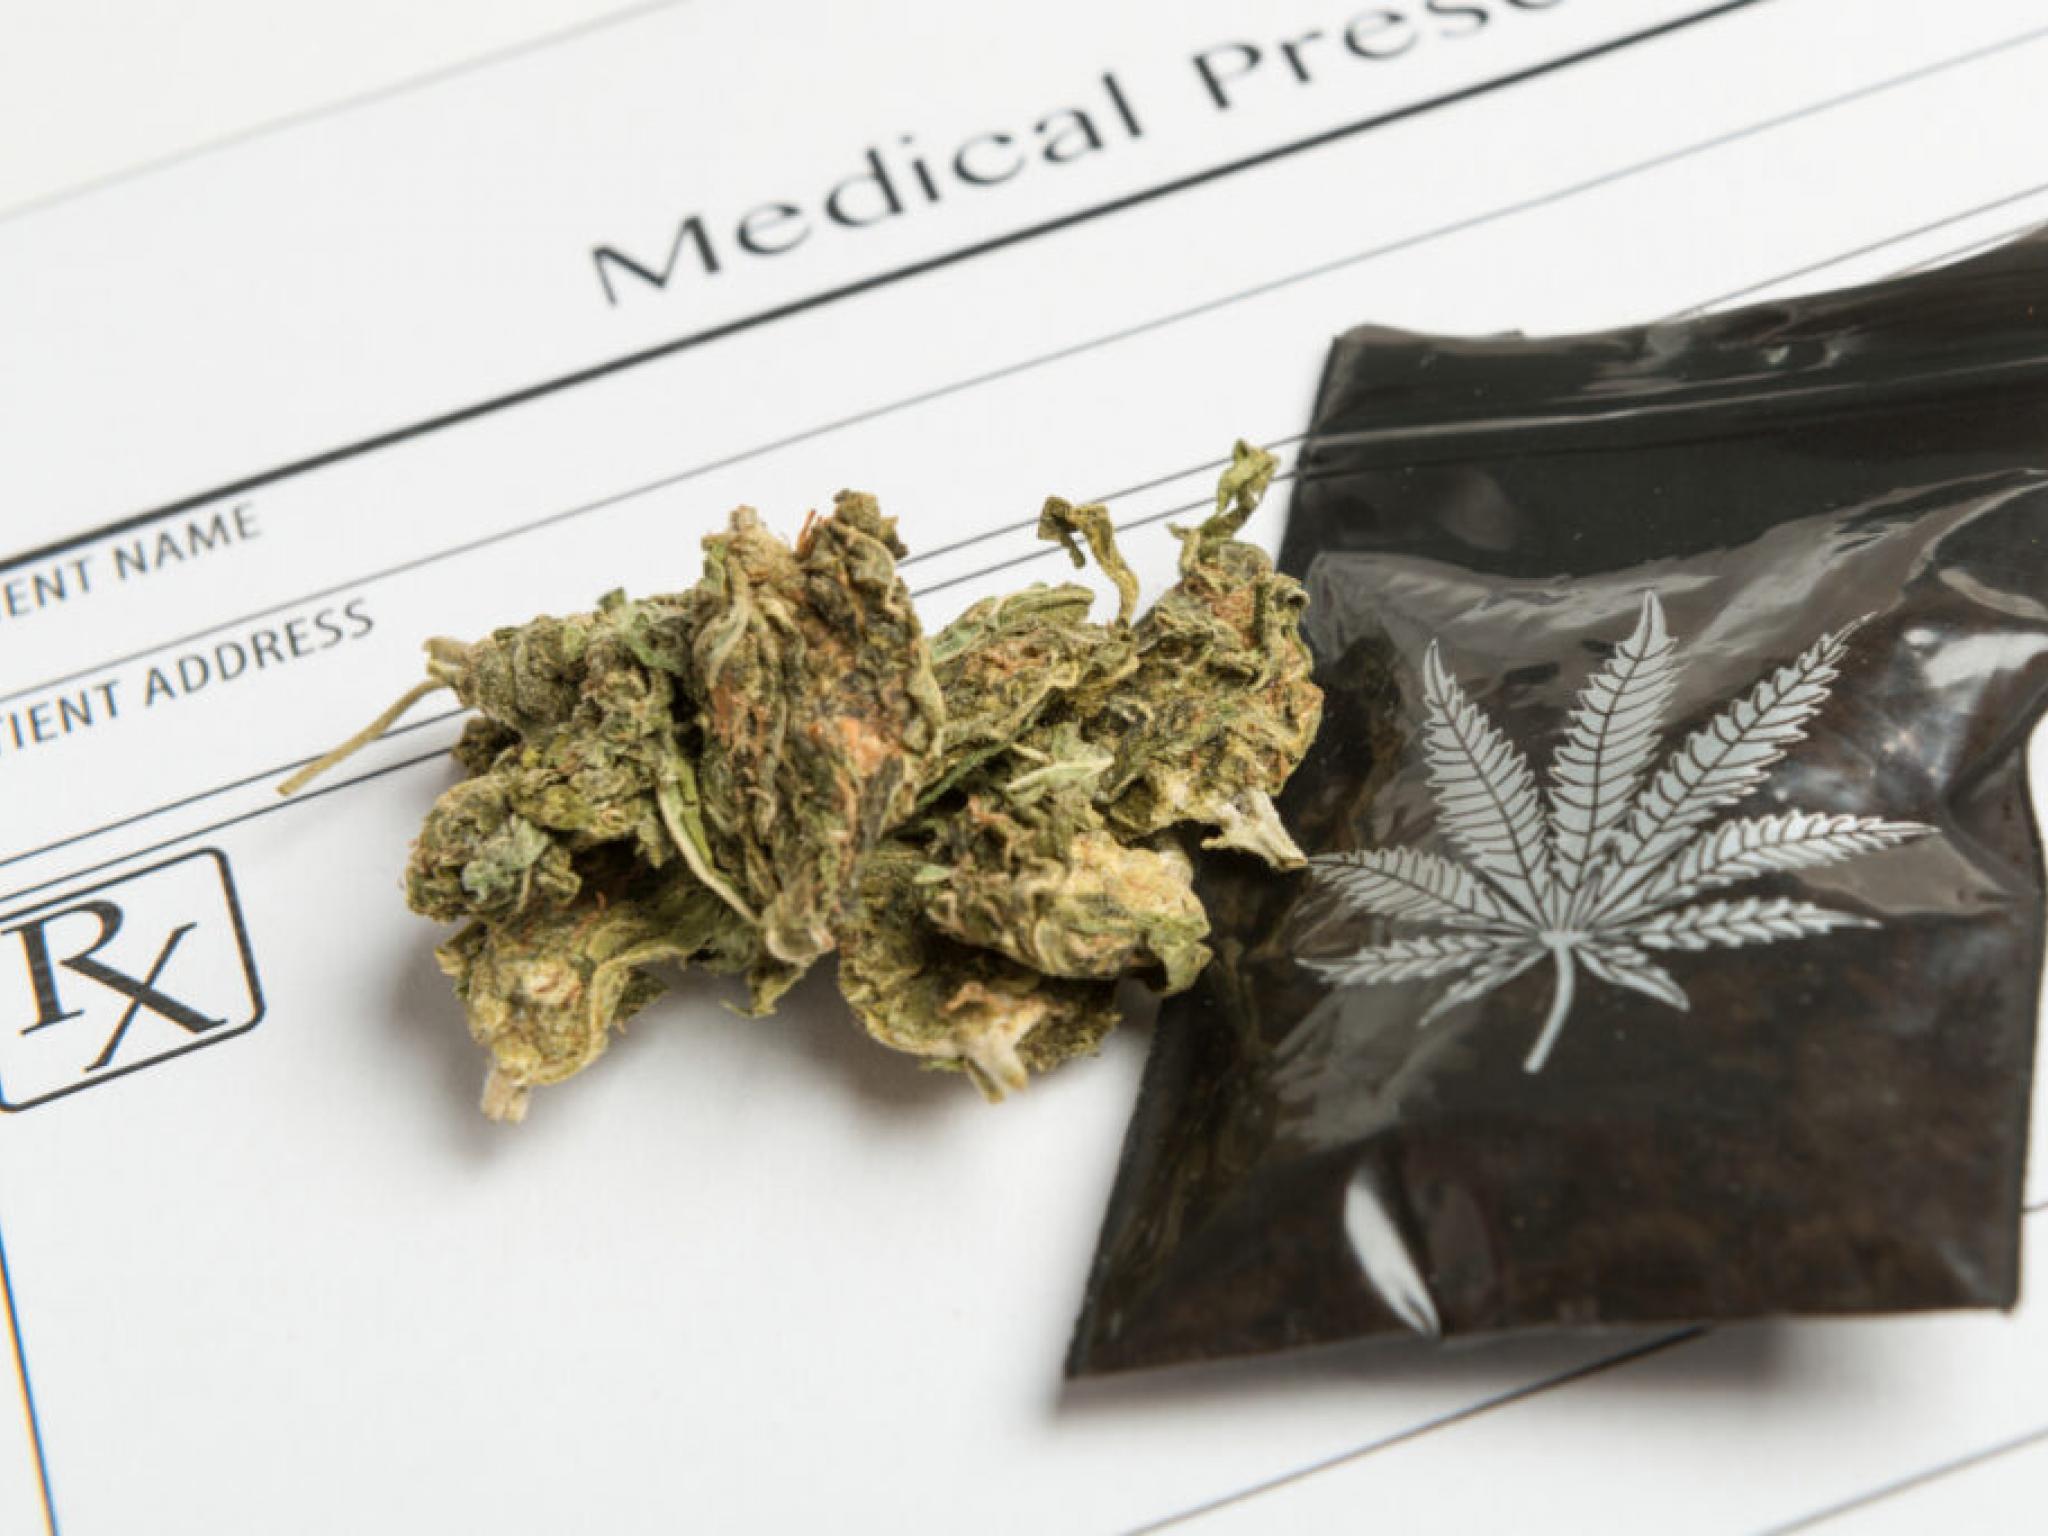  medical-cannabis-packaging-market-projected-to-reach-1172b-by-2032-amid-sustainability-push 